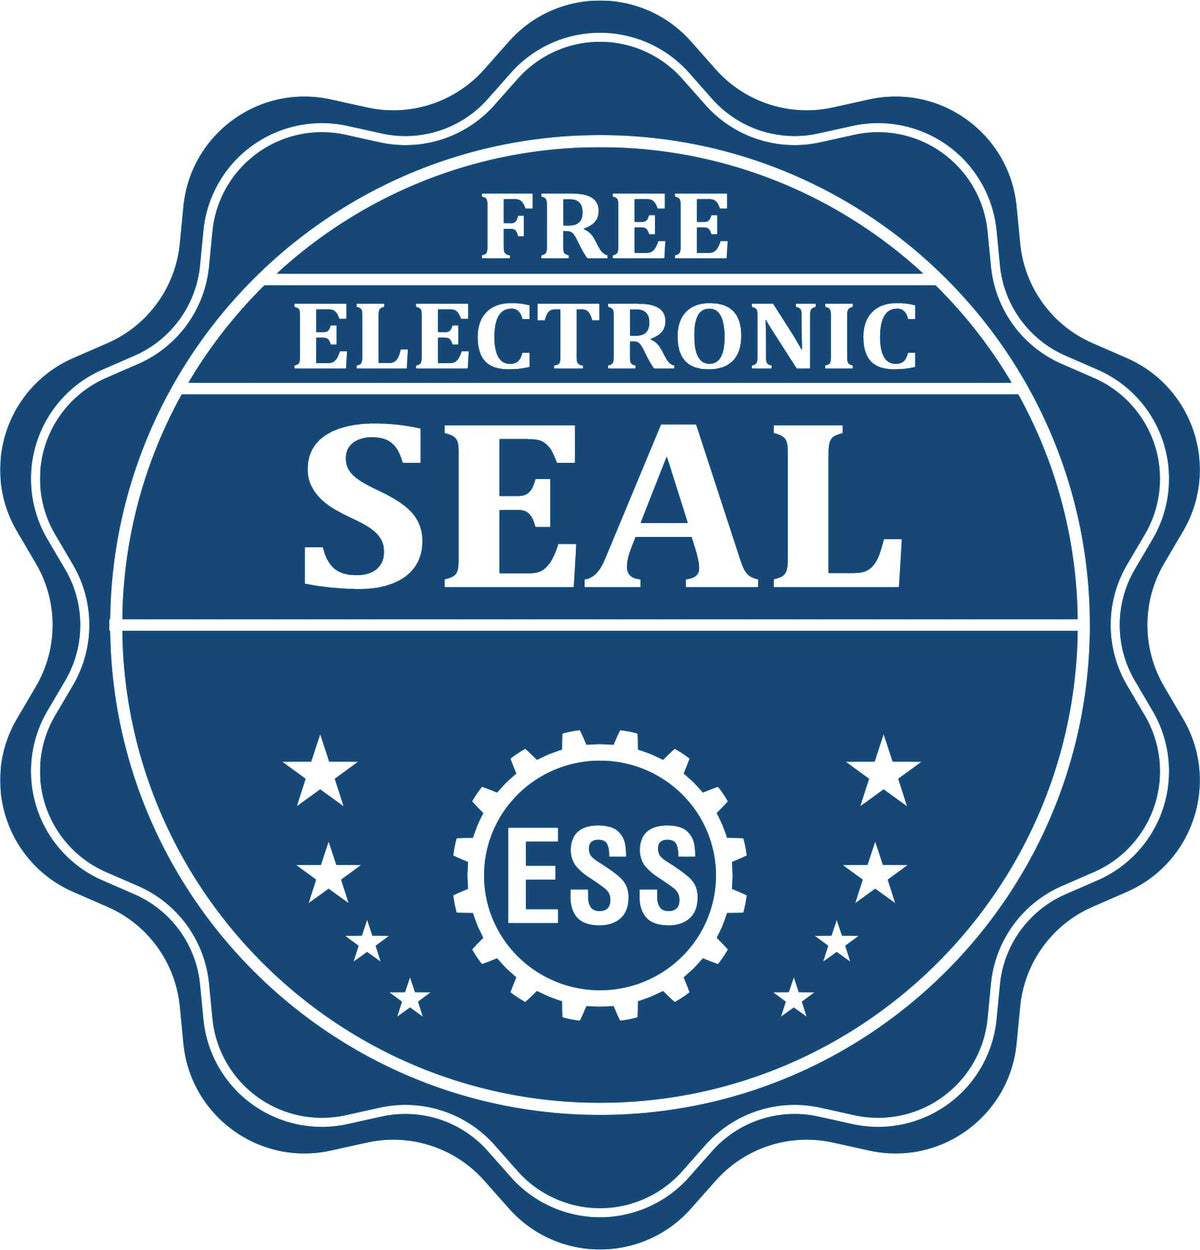 A badge showing a free electronic seal for the Slim Pre-Inked Rectangular Notary Stamp for South Dakota with stars and the ESS gear on the emblem.